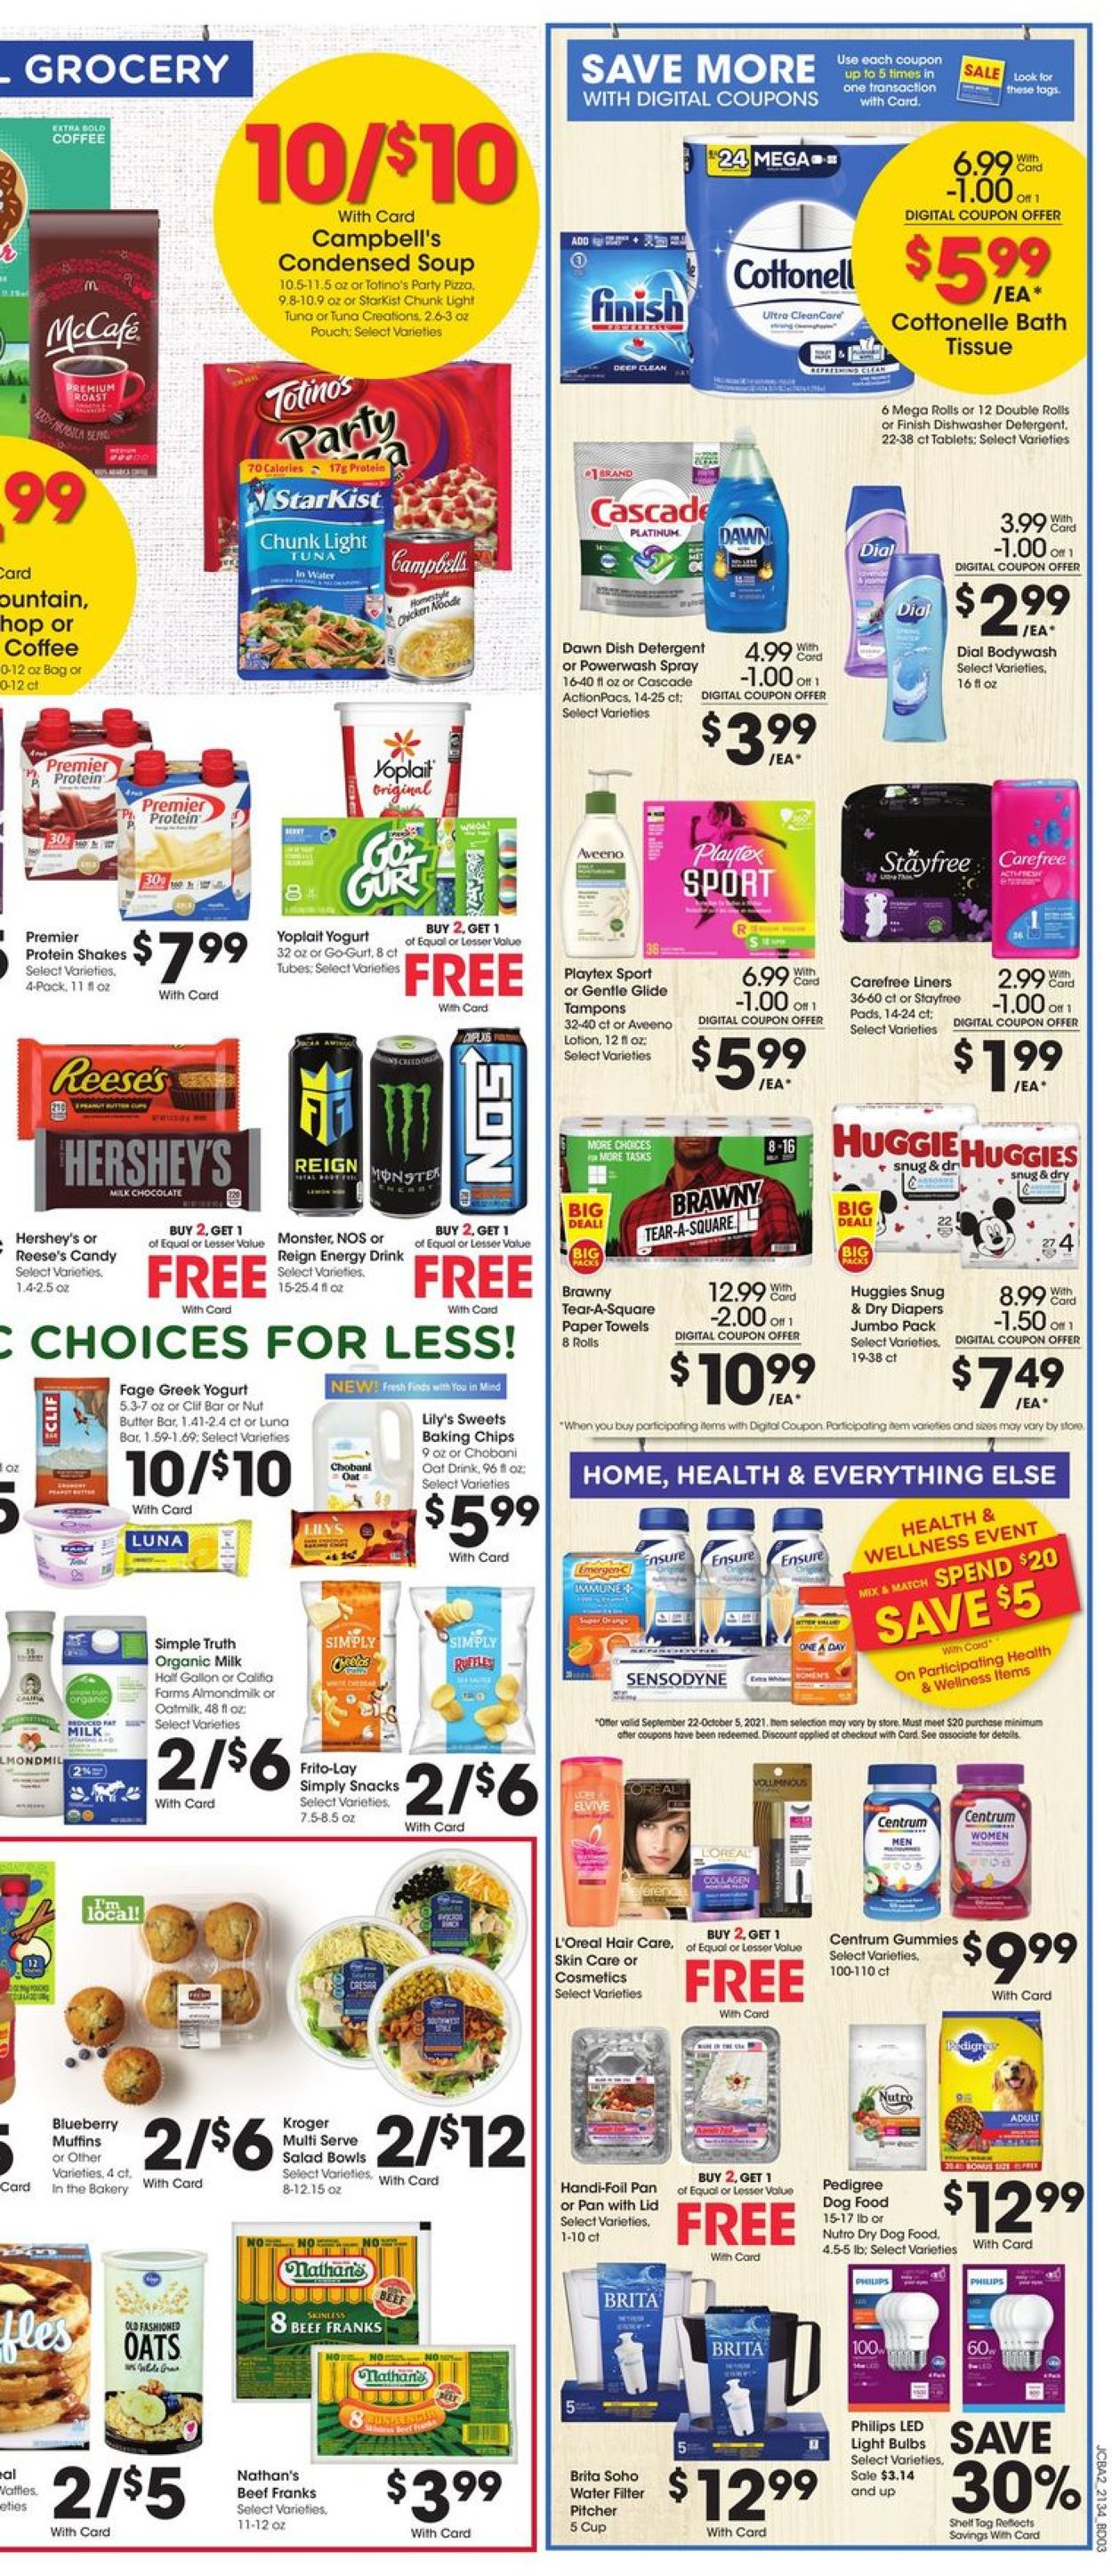 Catalogue Jay C Food Stores from 09/22/2021